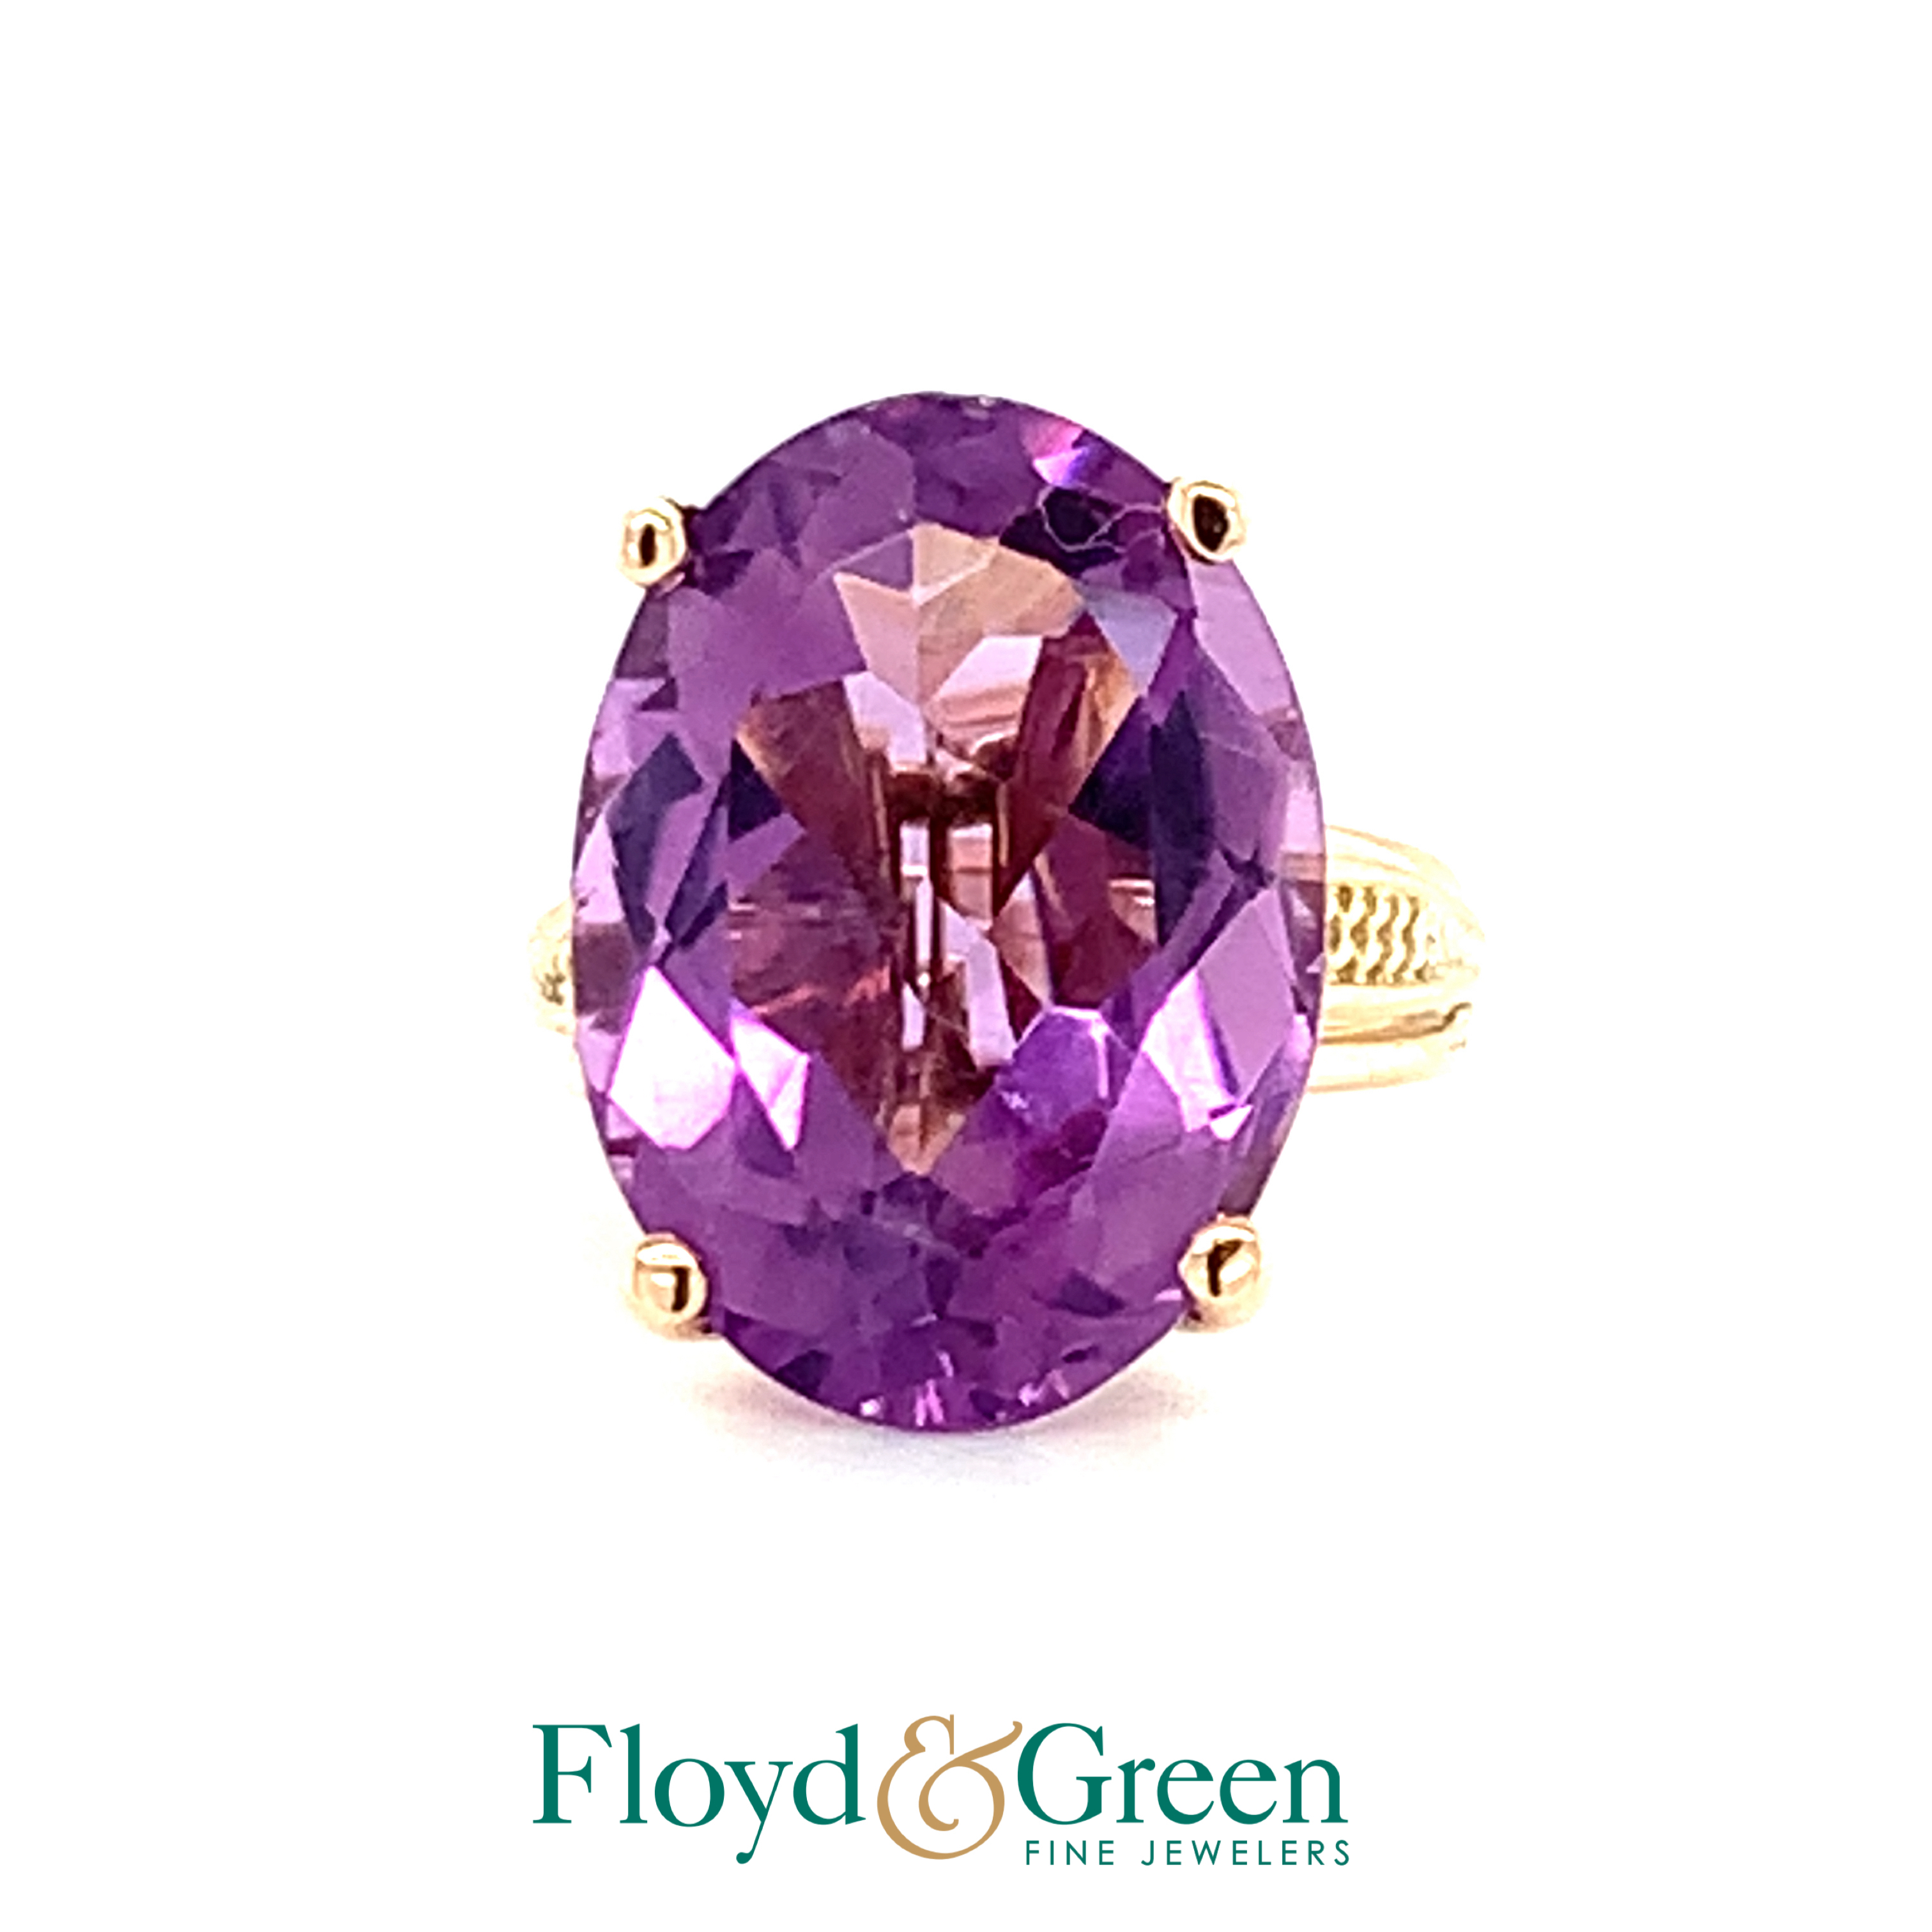 Solitaire 14 Karat Yellow 
Amethyst Oval 18.09 ct 
Color: Purple
Size: 6